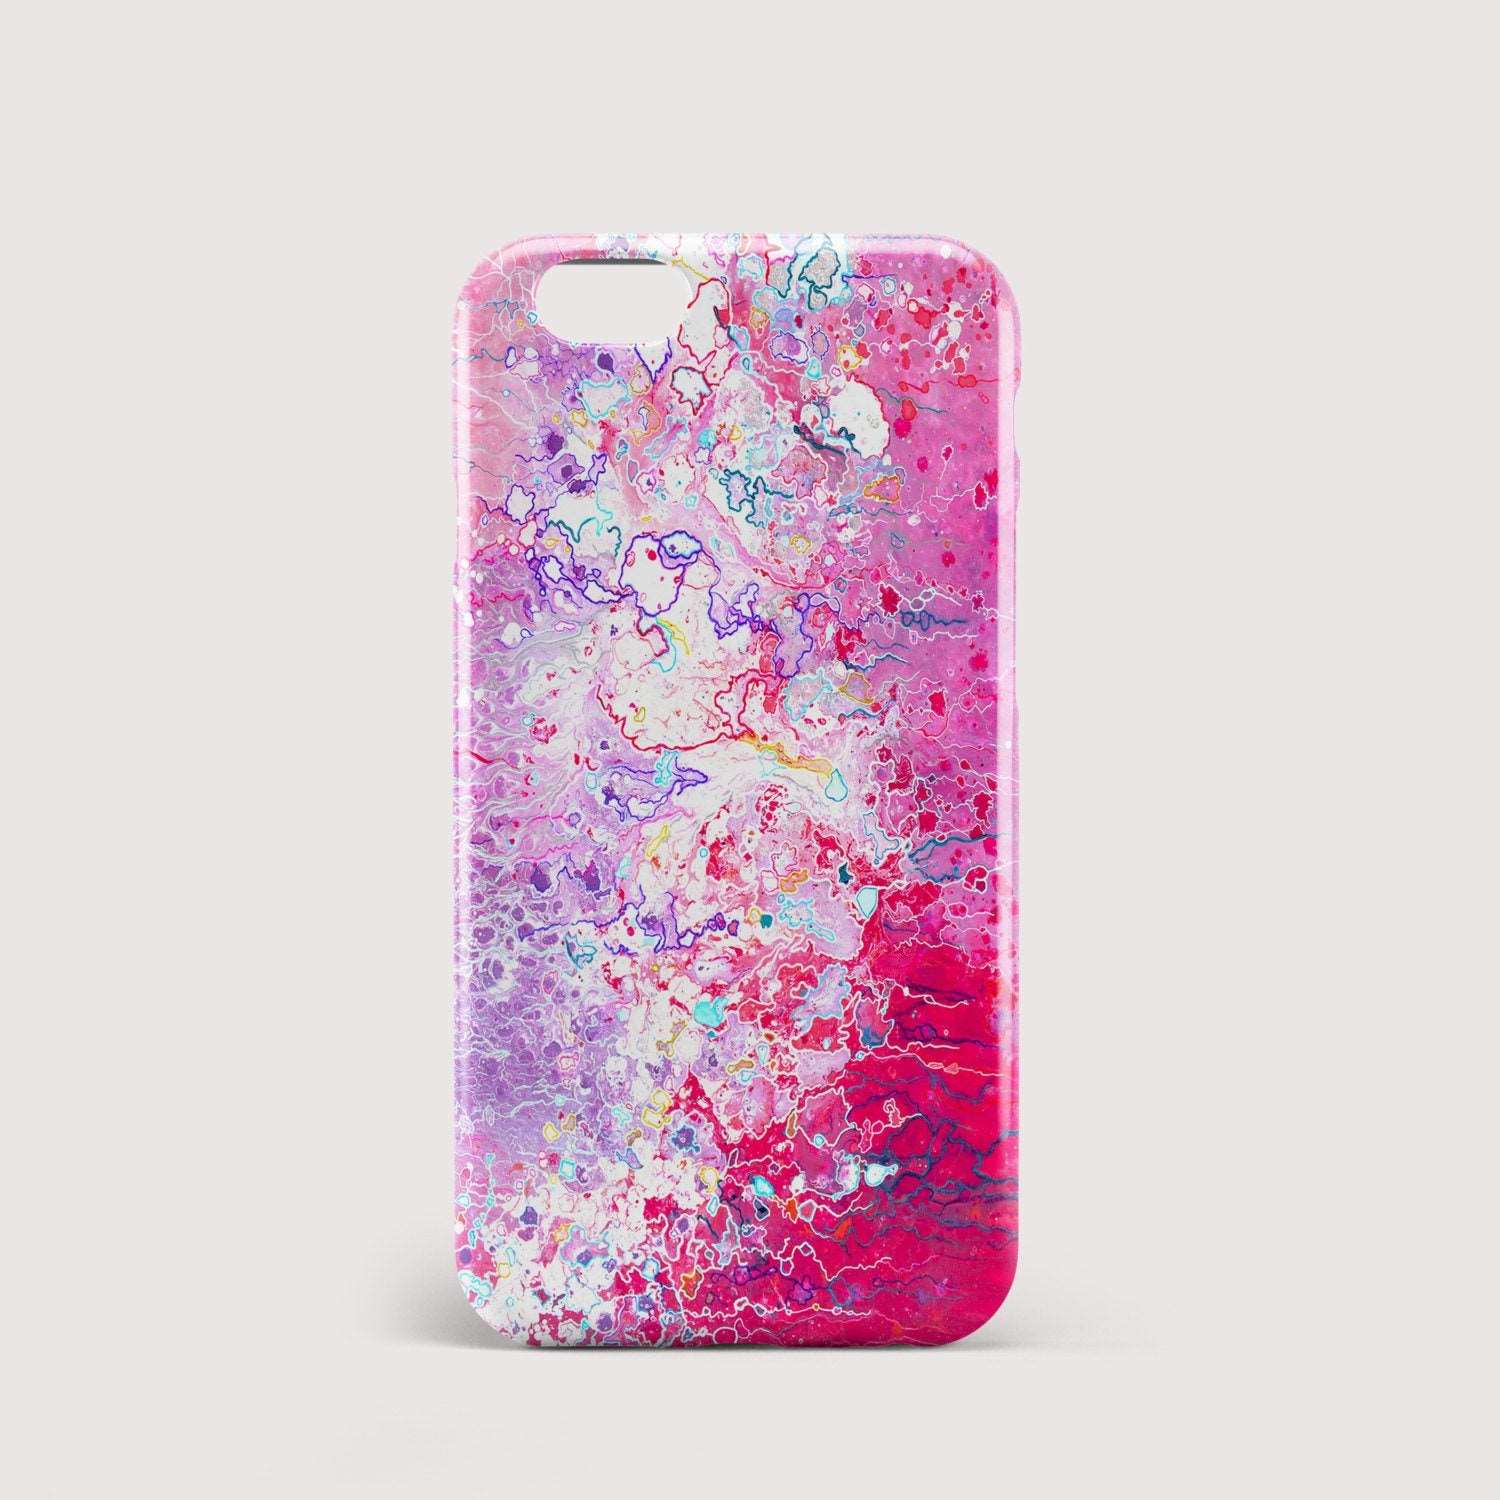 Falling Through Clouds Pink iPhone Case - Louise Mead